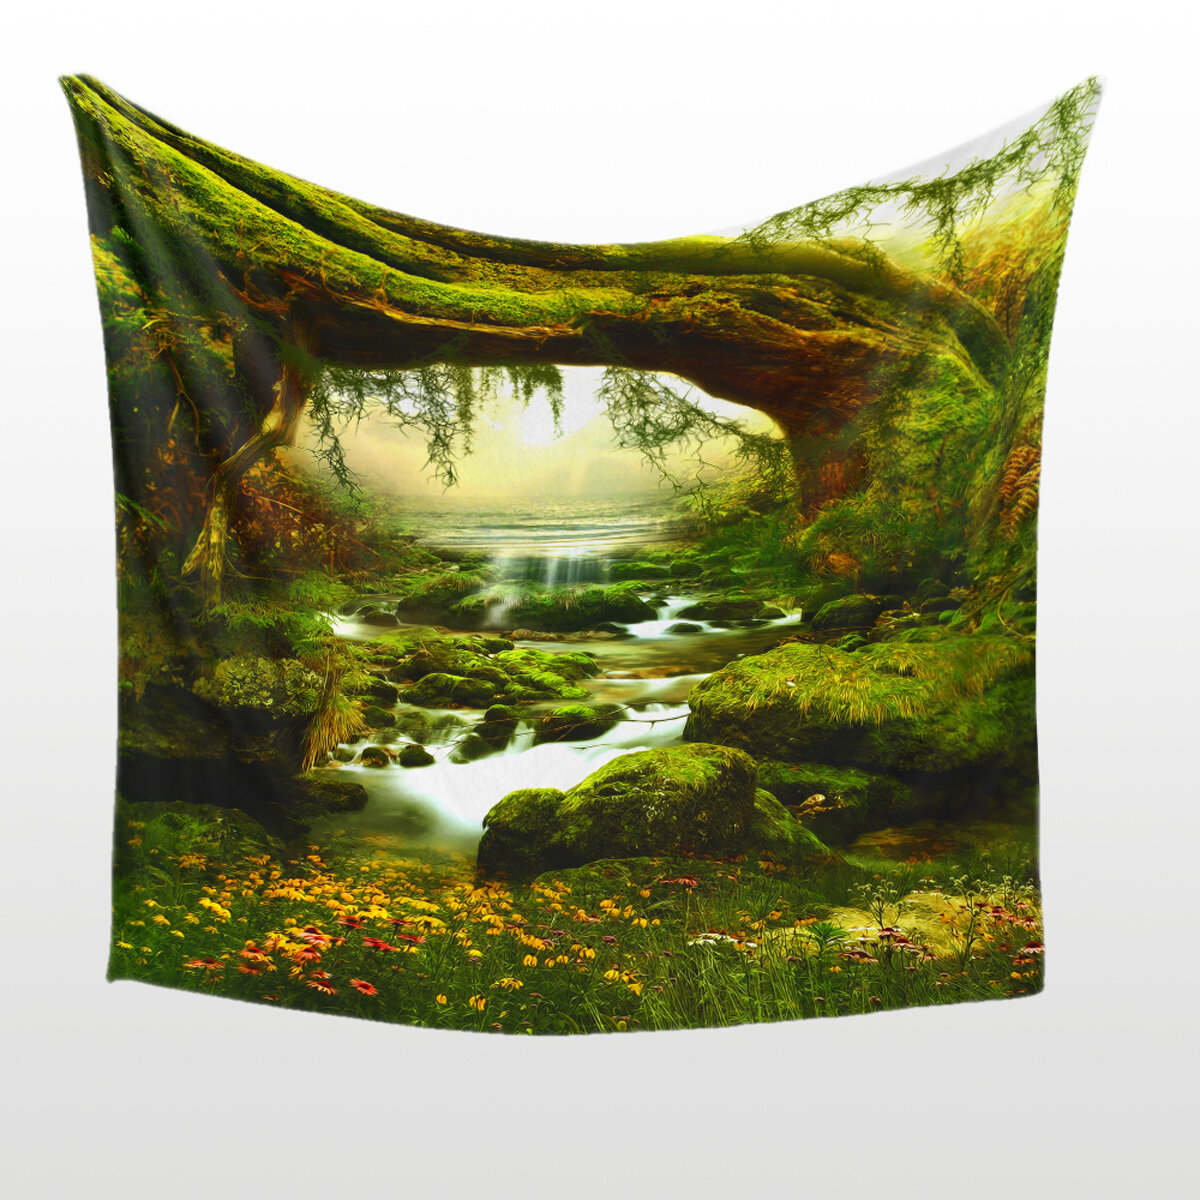 3D Digital Printing Tapestry Landscape Hanging Blanket Home Living Room Wall Ornament Tapestries Acc